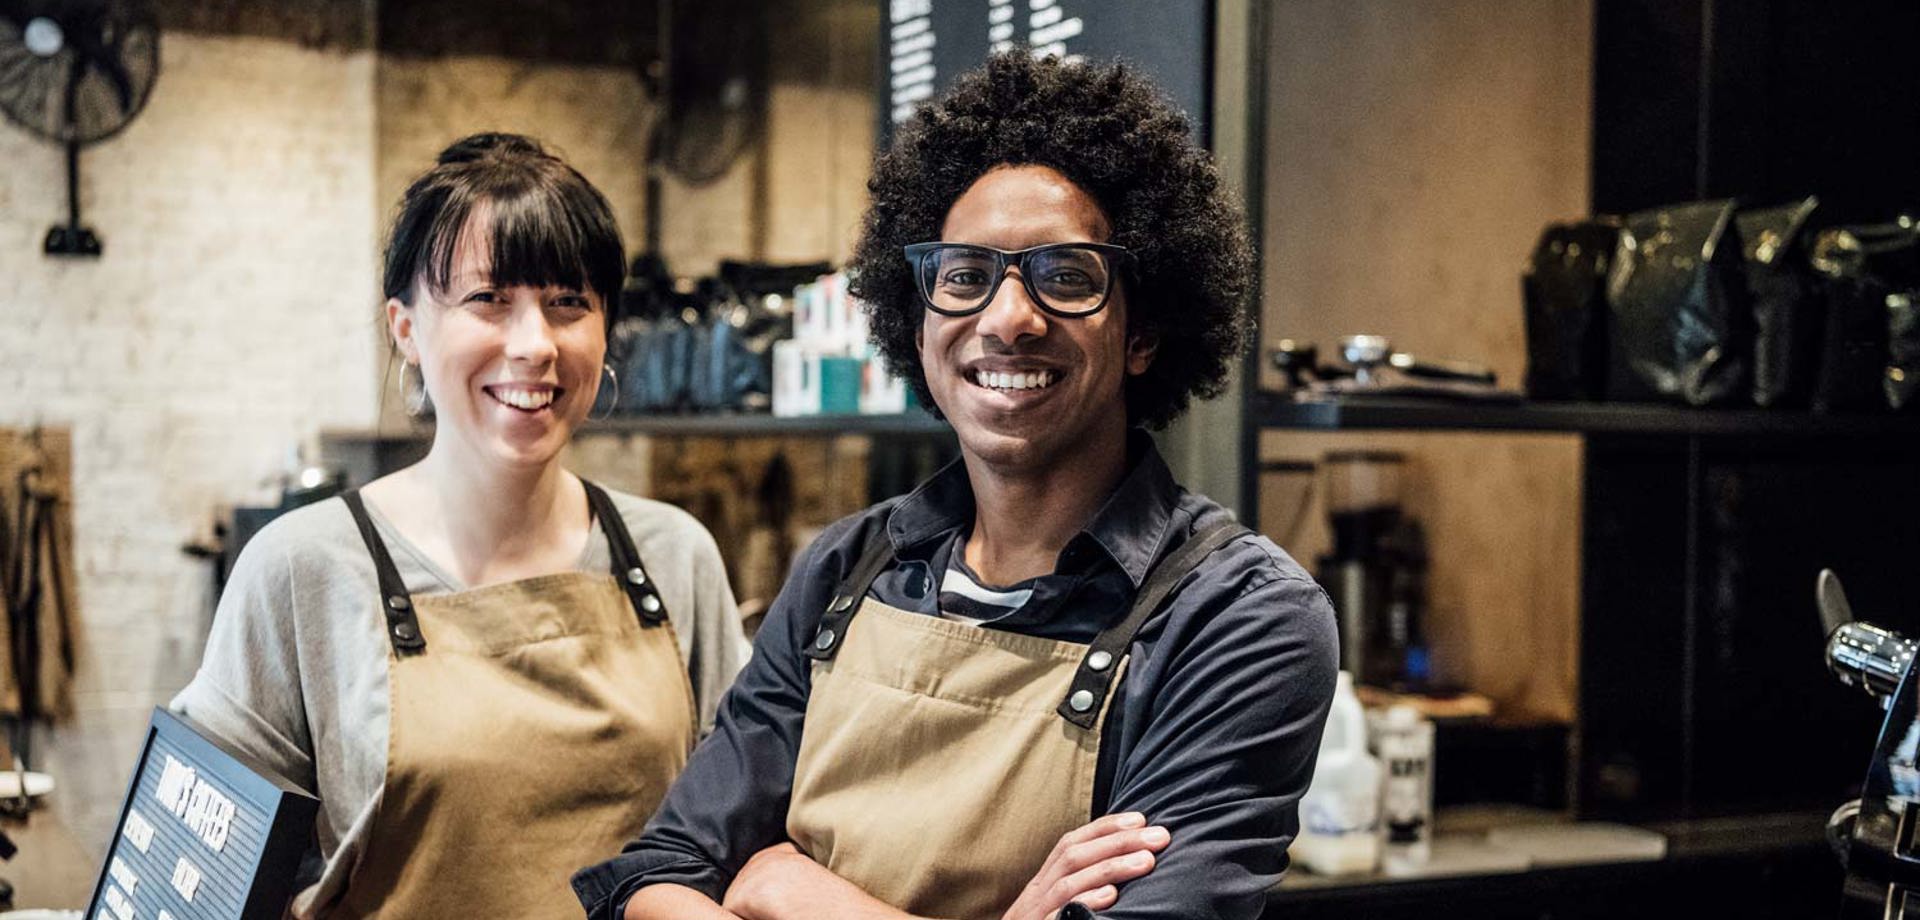 A male and female barista standing in a cafe. They are both wearing brown aprons, smiling at the camera.